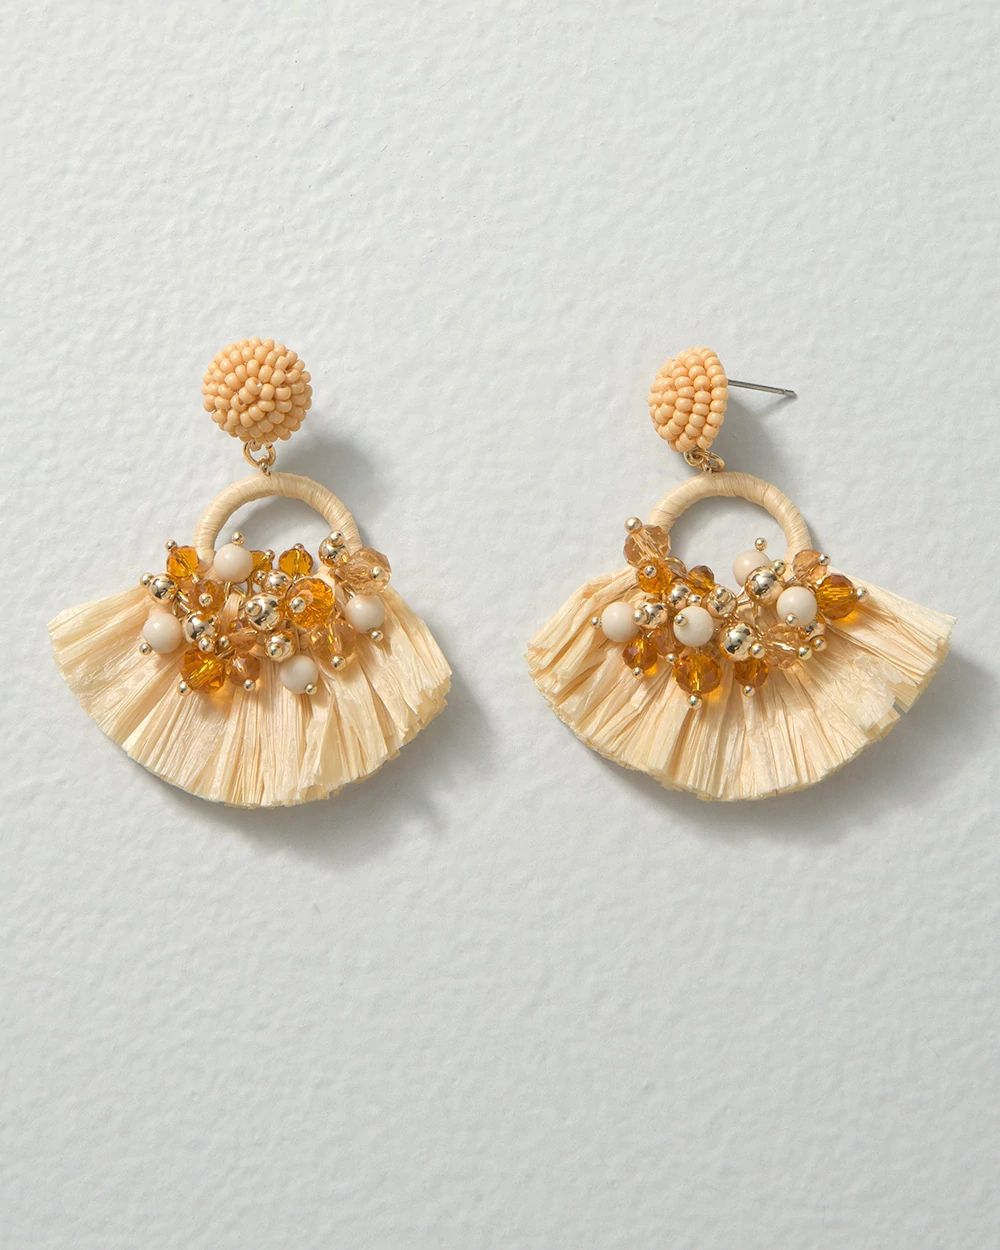 Neutral Raffia Statement Earrings click to view larger image.